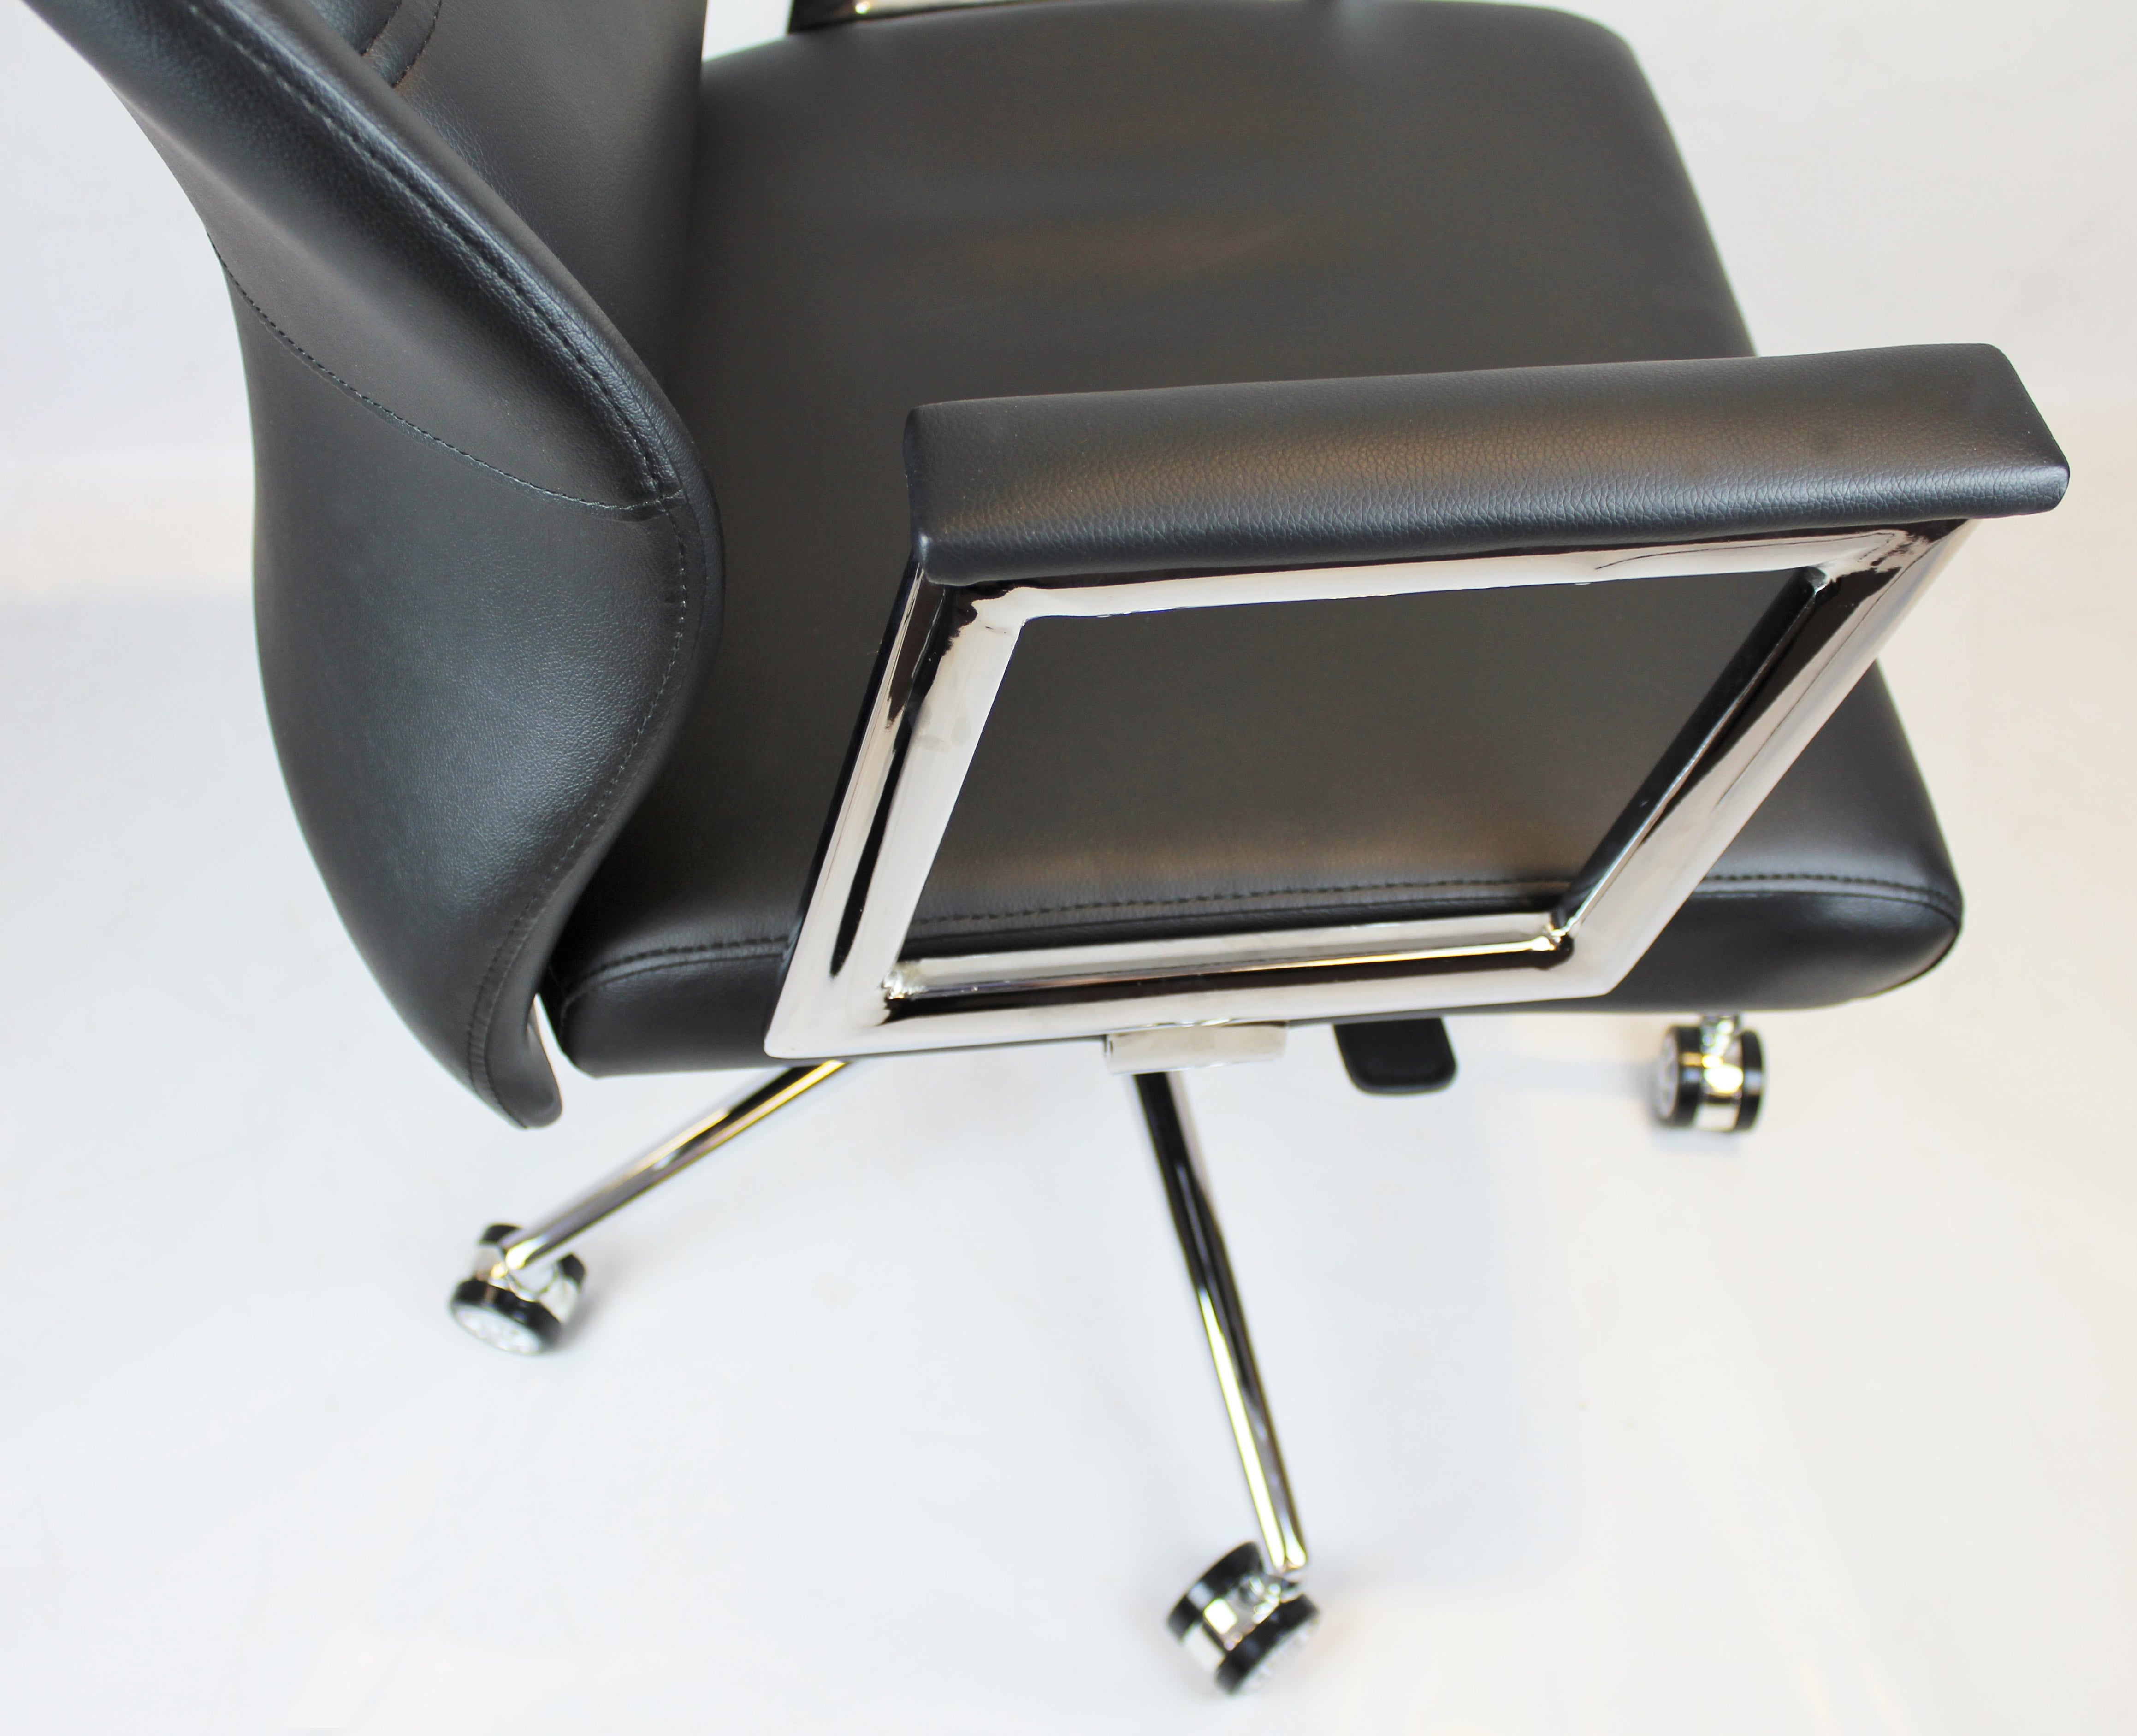 Modern Black Leather Executive Office Chair - DH-103